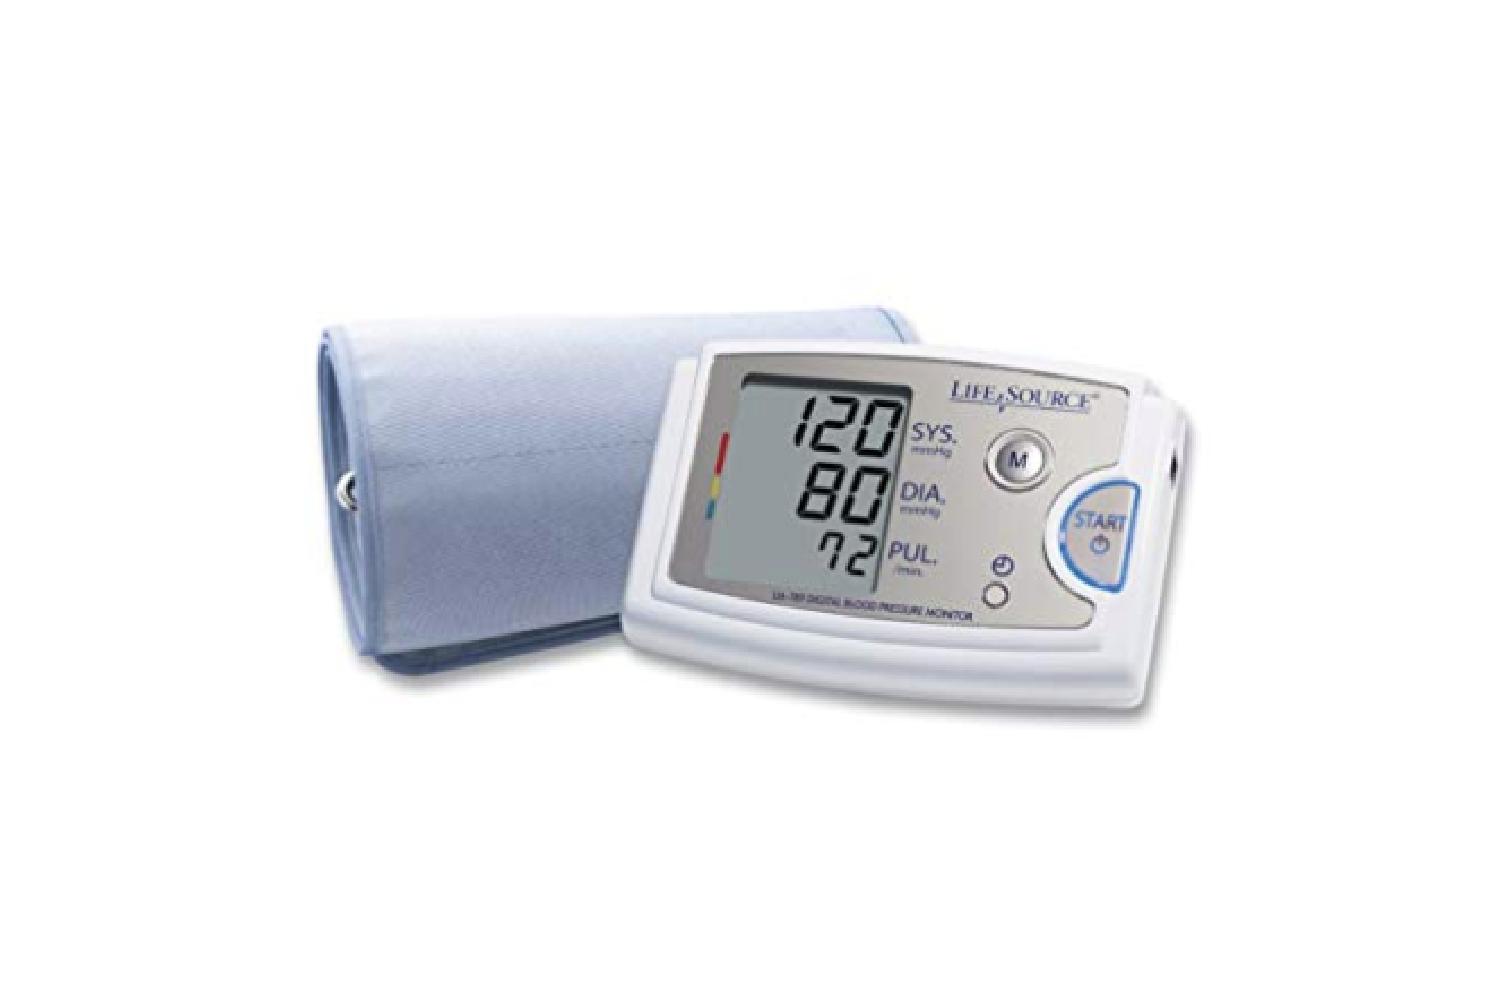 LifeSource Blood Pressure Monitor - Optional AC Adapter (Onl